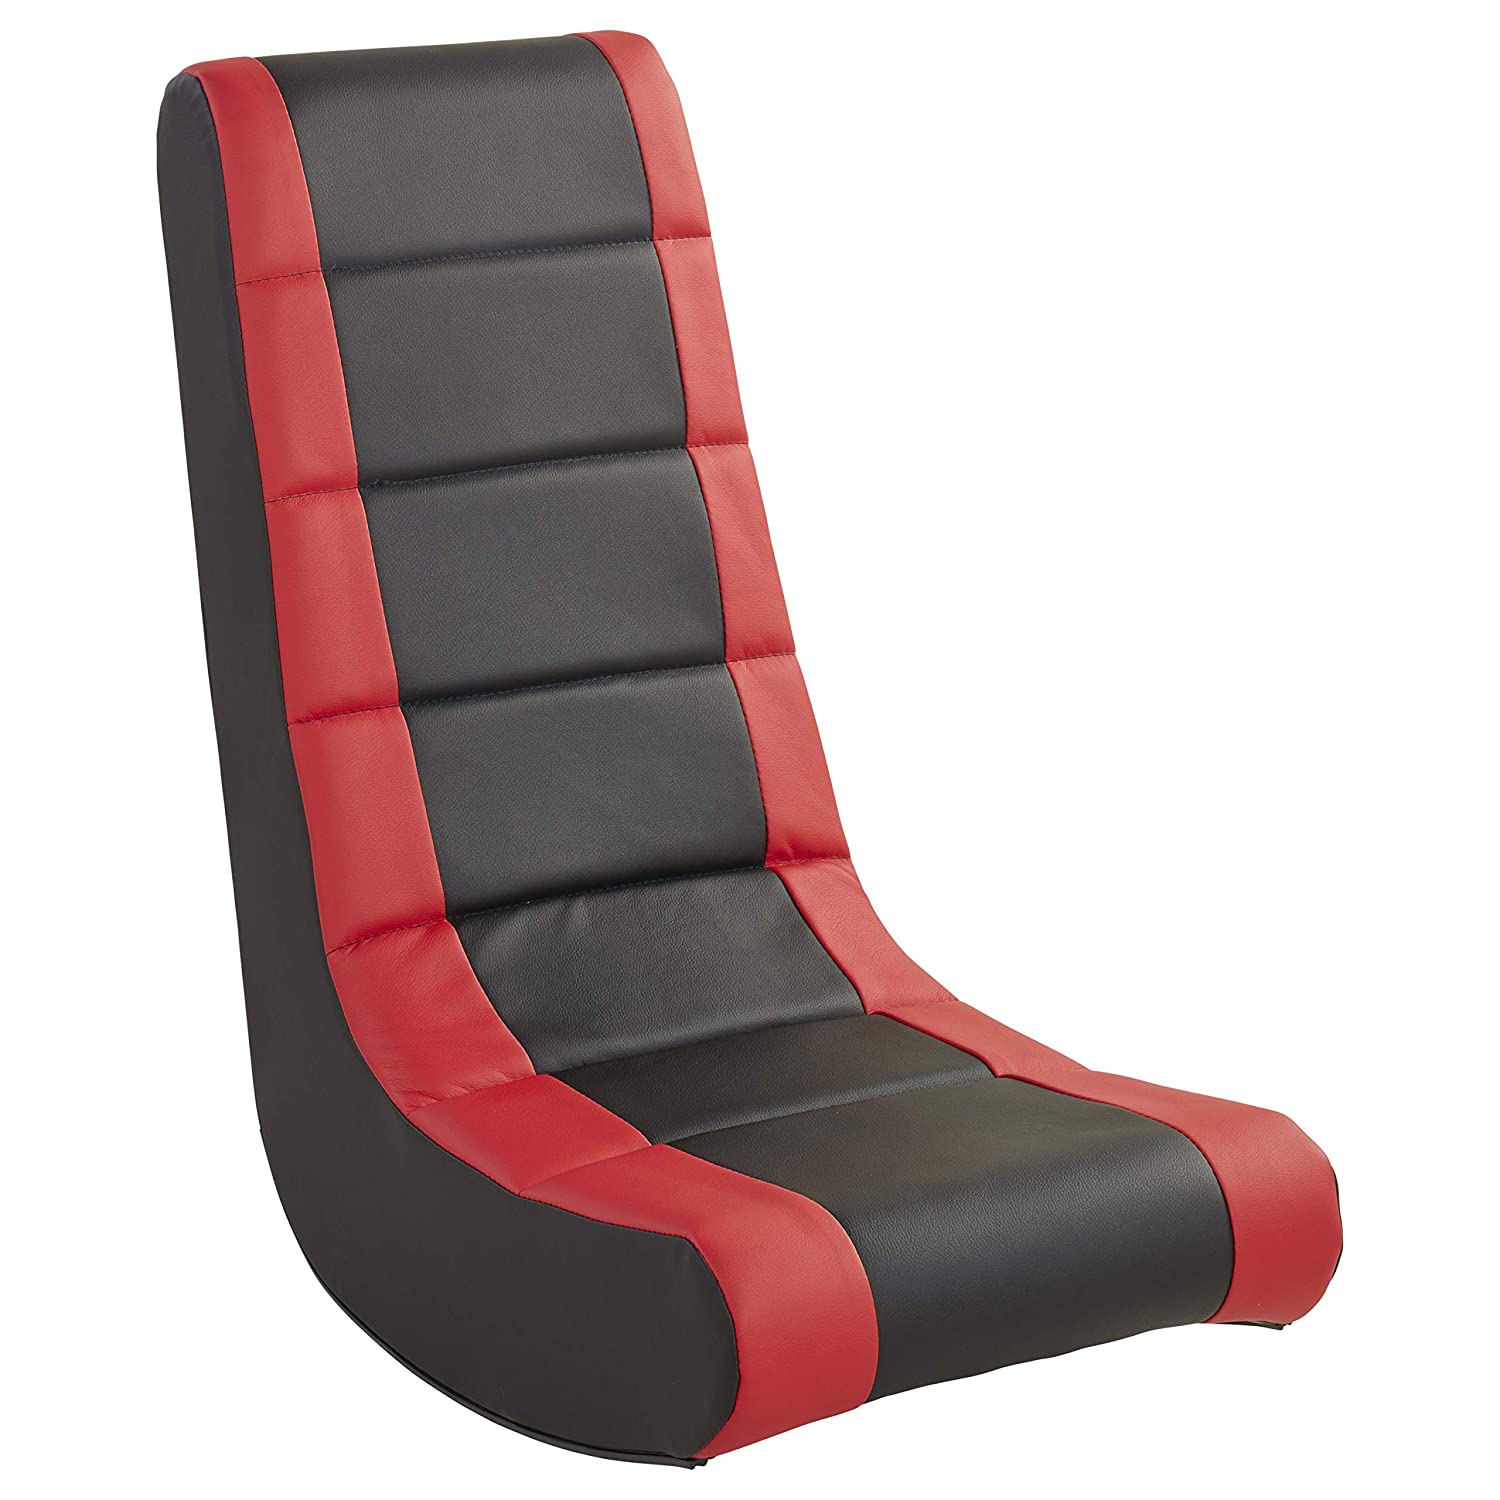 Review of Factory Direct Partners Floor Video Rocker - Cushioned Ground Chair